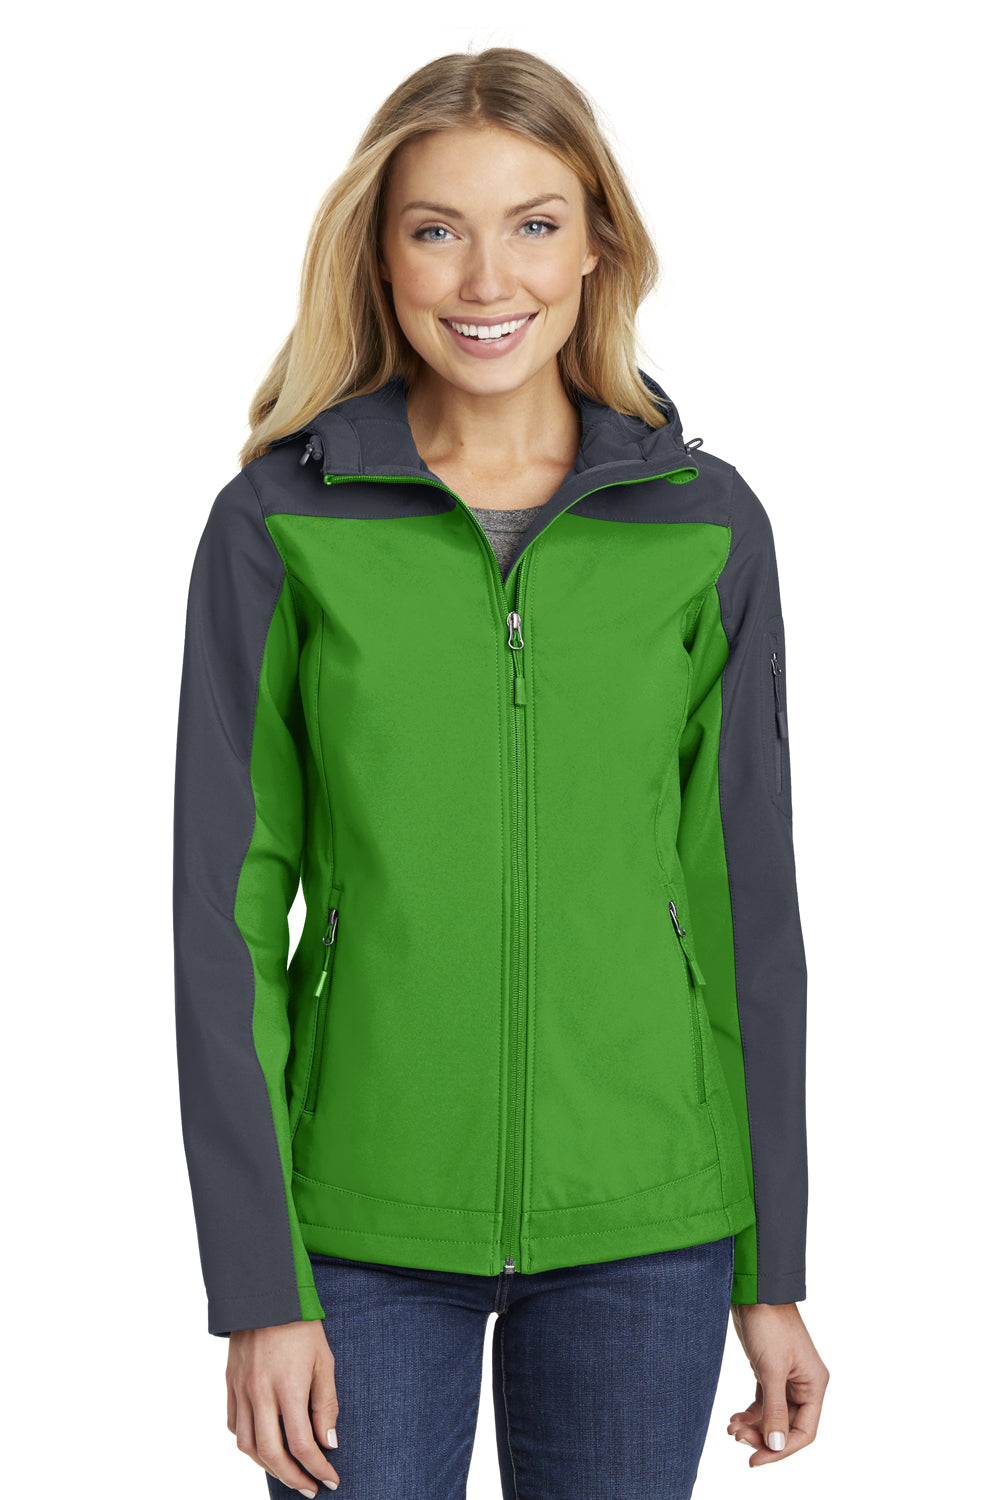 Port Authority L335 Womens Core Wind & Water Resistant Full Zip Hooded Jacket Green/Grey Front